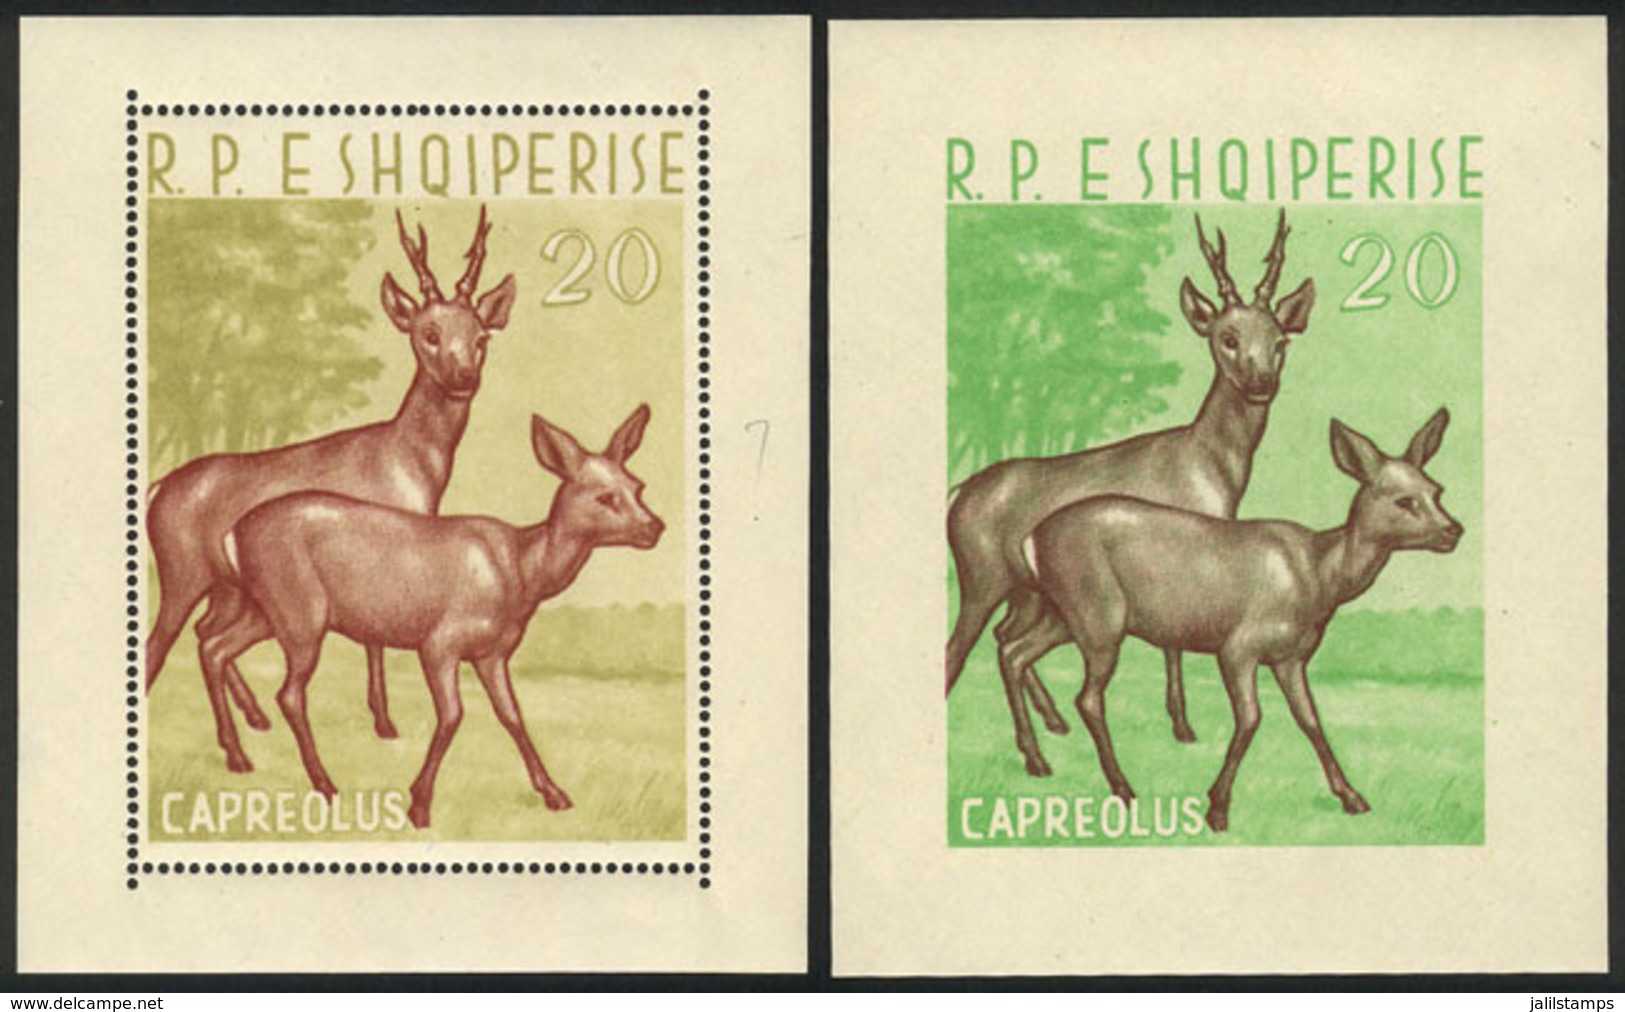 ALBANIA: Sc.643, 1962 20l. Deer, Perforated And Imperforate Sheets, MNH, Excellent Quality, Catalog Value US$260 - Albania